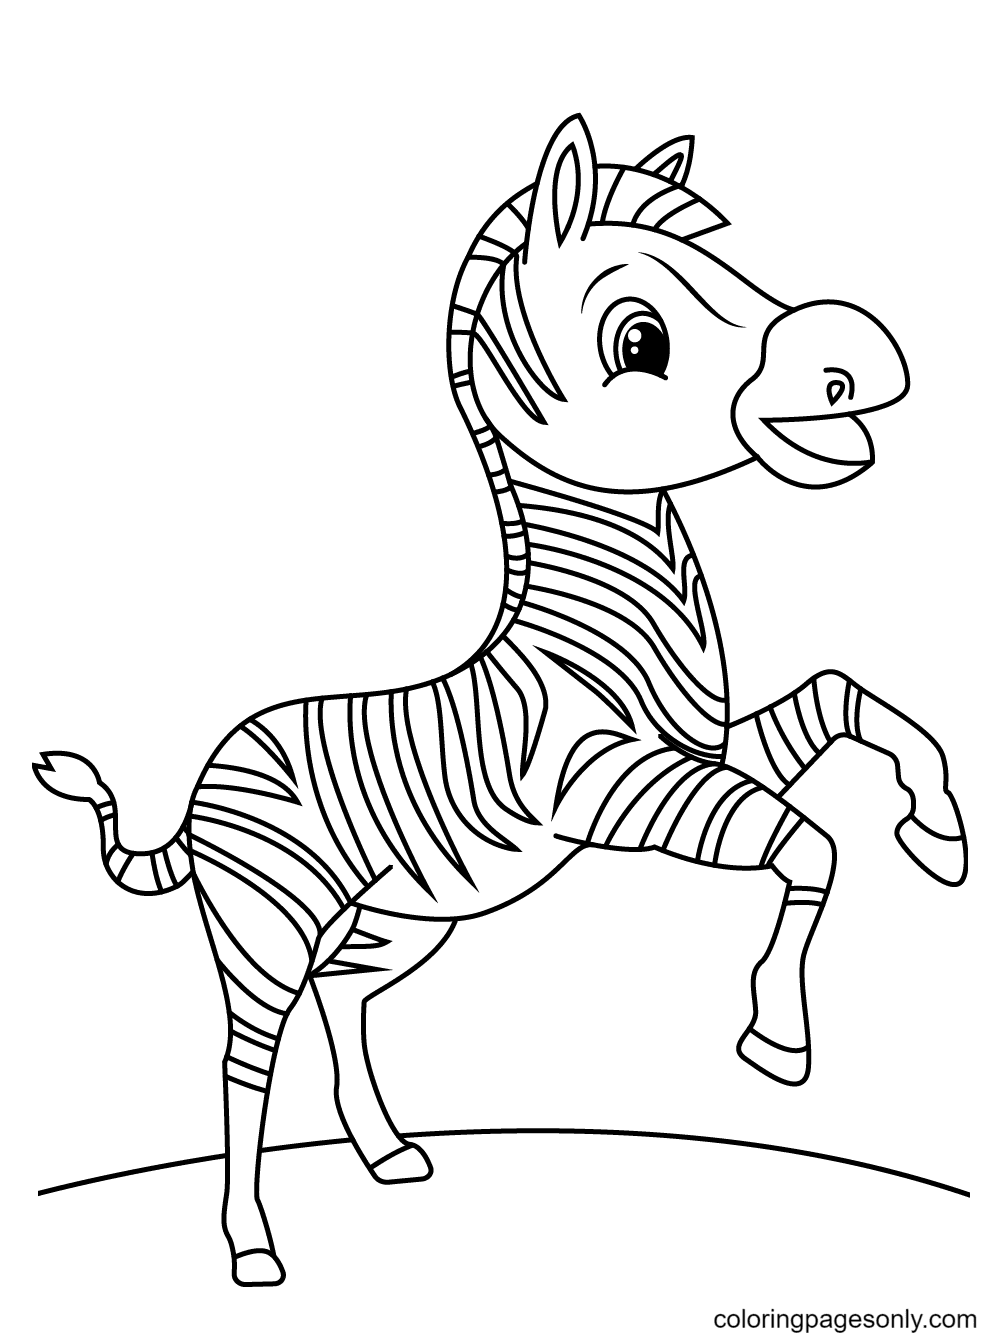 A Very Excited Zebra Coloring Page